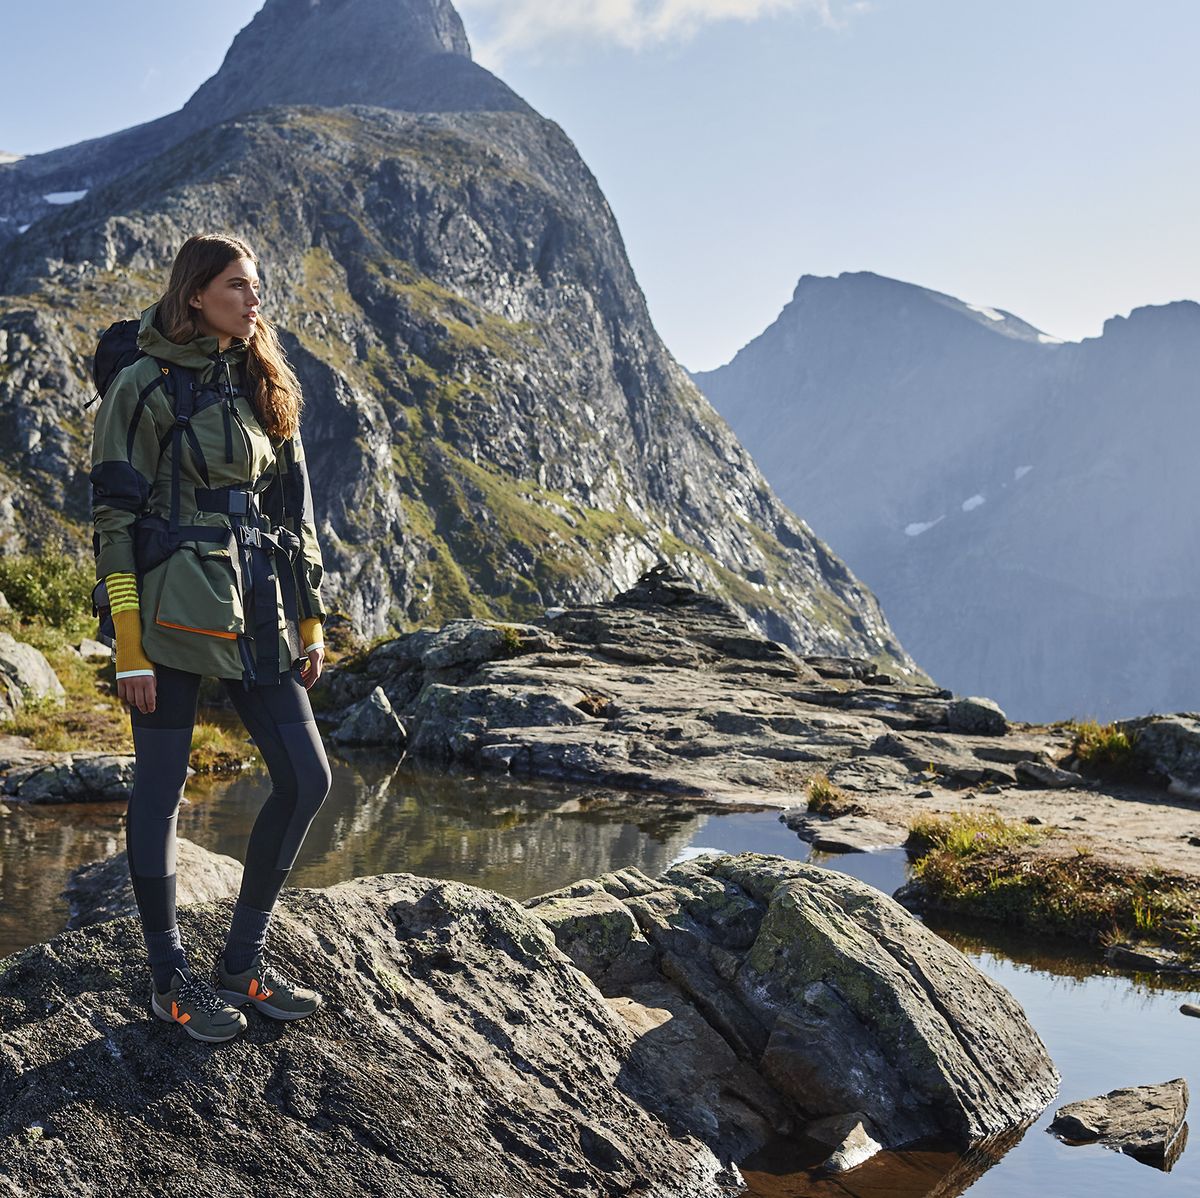 The 10 best solo hiking trips in the US for female travelers